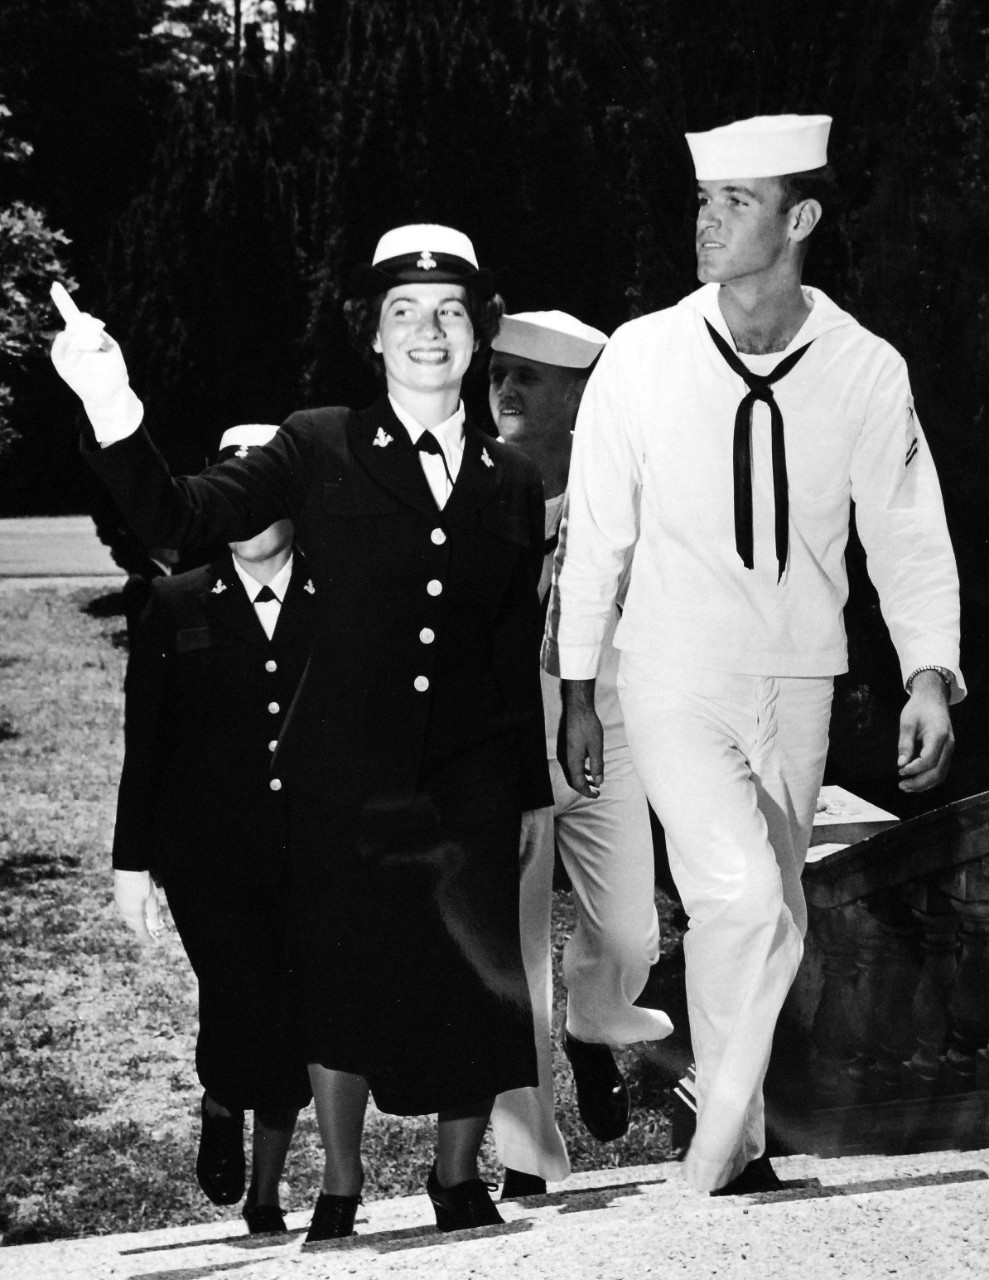 USN 709491:    WAVES Observe 13th Anniversary: Preparatory to their Thirteenth Anniversary, July 1955.   Seaman Apprentice WAVE and a male Seaman Apprentice enter the Old Jacob Tome School at Bainbridge, Maryland.   Master Caption:  WAVES Observe 13th Anniversary:   Preparatory to their Thirteenth Anniversary, July 30, WAVE Recruits at the Naval Training Center, Bainbridge, Maryland, pass in review.  These young women will take their places with sailors in important technical and clerical duty assignments both at home and abroad.  At that time, there were approximately 7,000 WAVES on active duty in the U.S. Navy.   Photograph released July 25, 1955.  Official U.S. Navy photograph, now in the collections of the National Archives.   